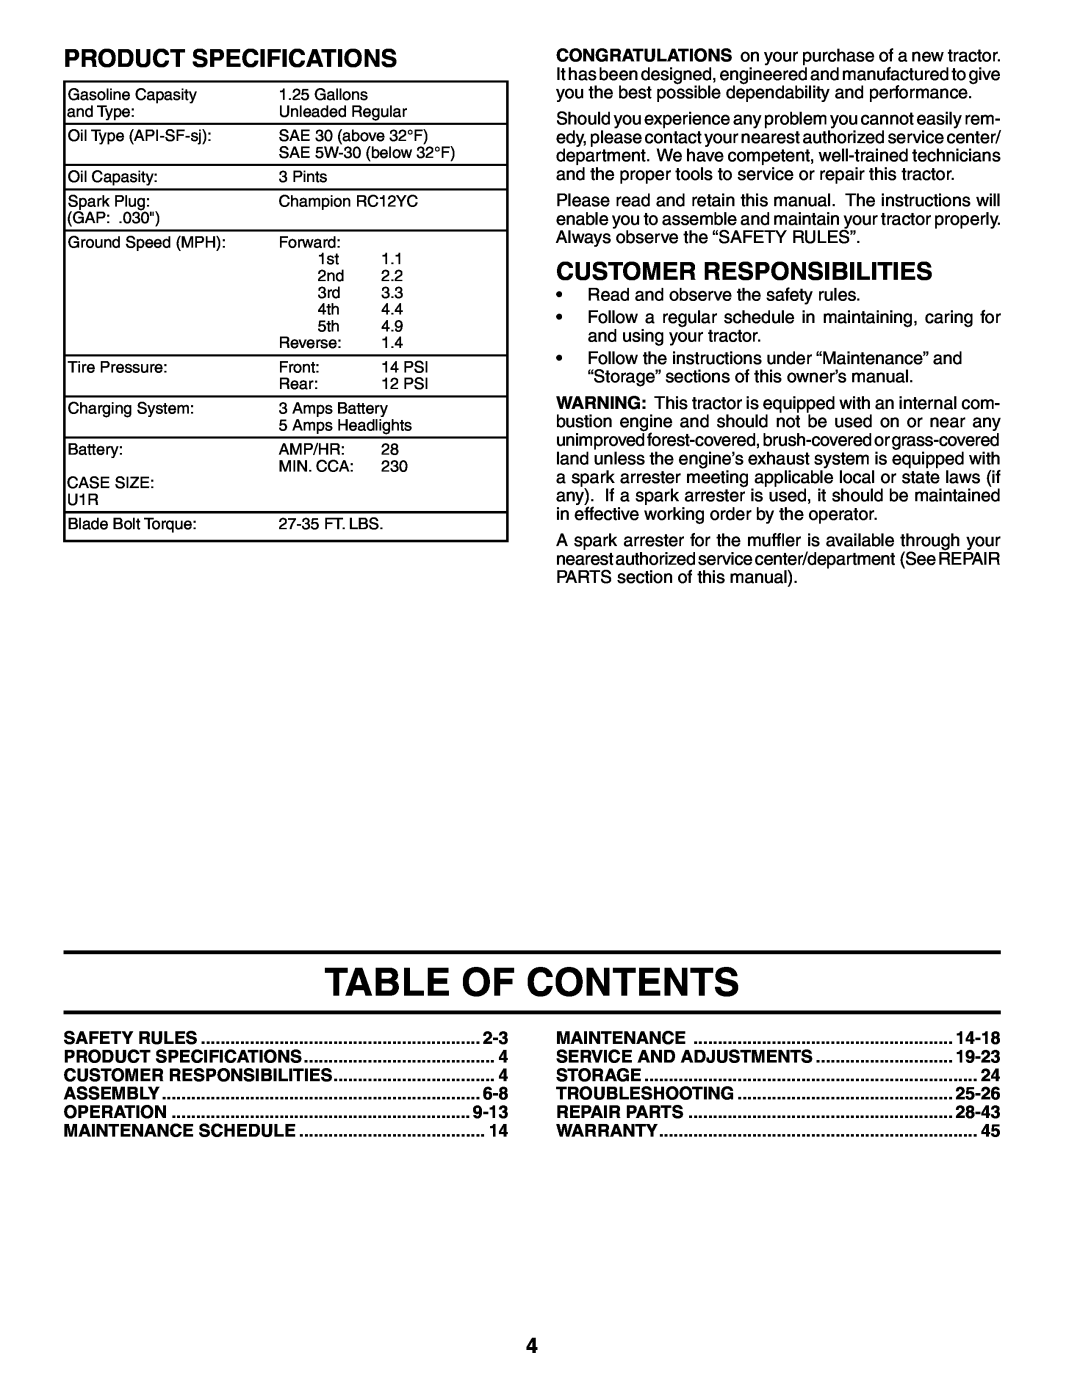 Weed Eater WE1338A Table Of Contents, Product Specifications, Customer Responsibilities, 9-13, 14-18, 19-23, 25-26, 28-43 